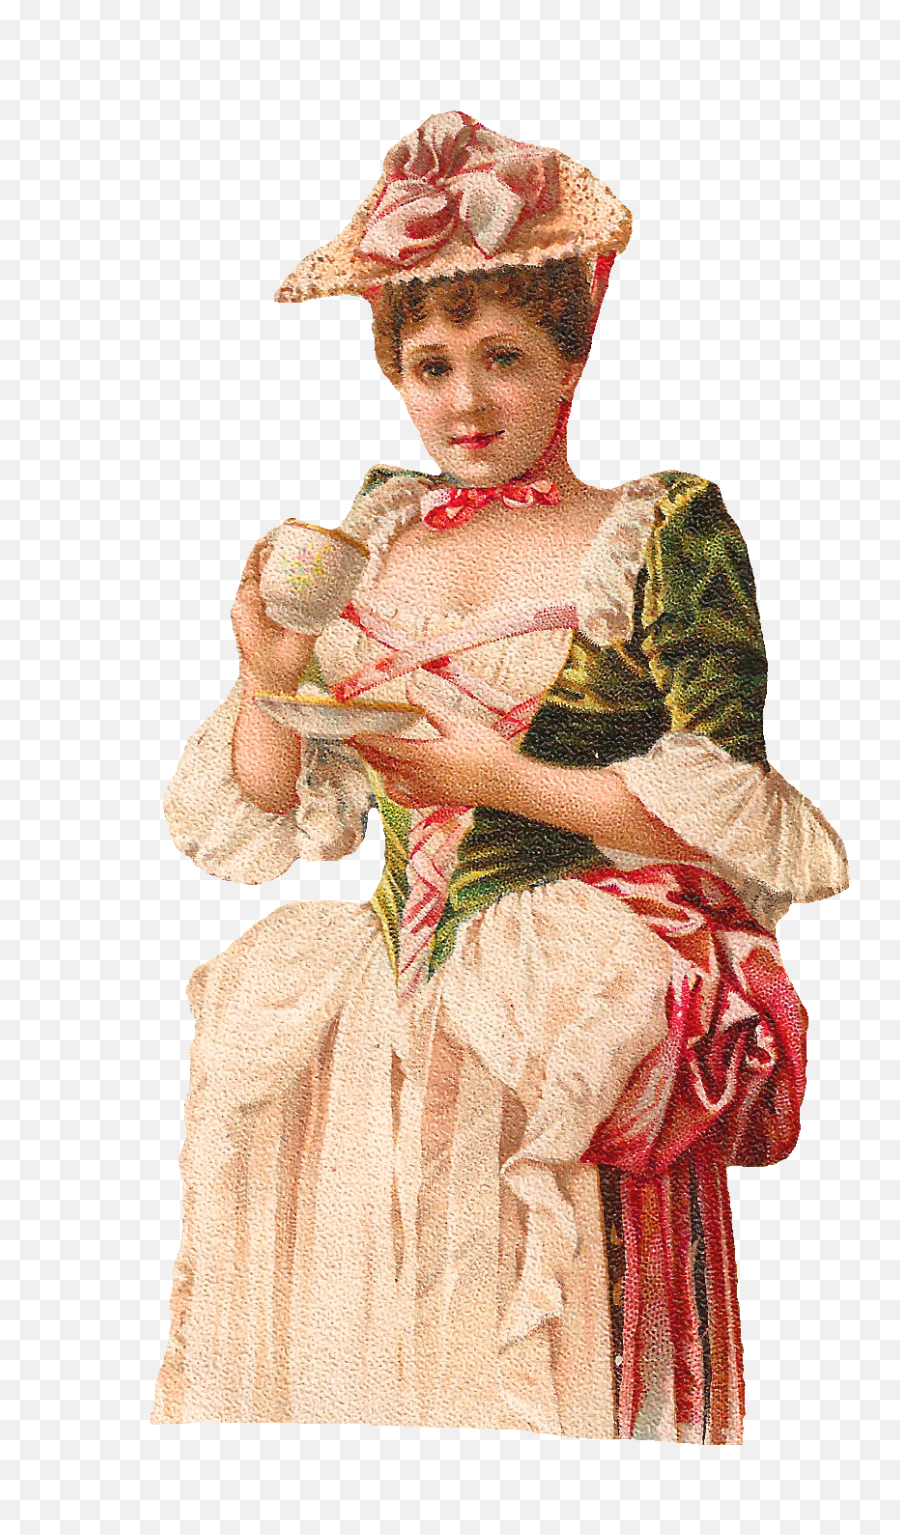 Woman Drinking Tea Clip Art - Victorian Lady Drinking Tea Victorian Ladies Sipping Tea Emoji,Drinking Png